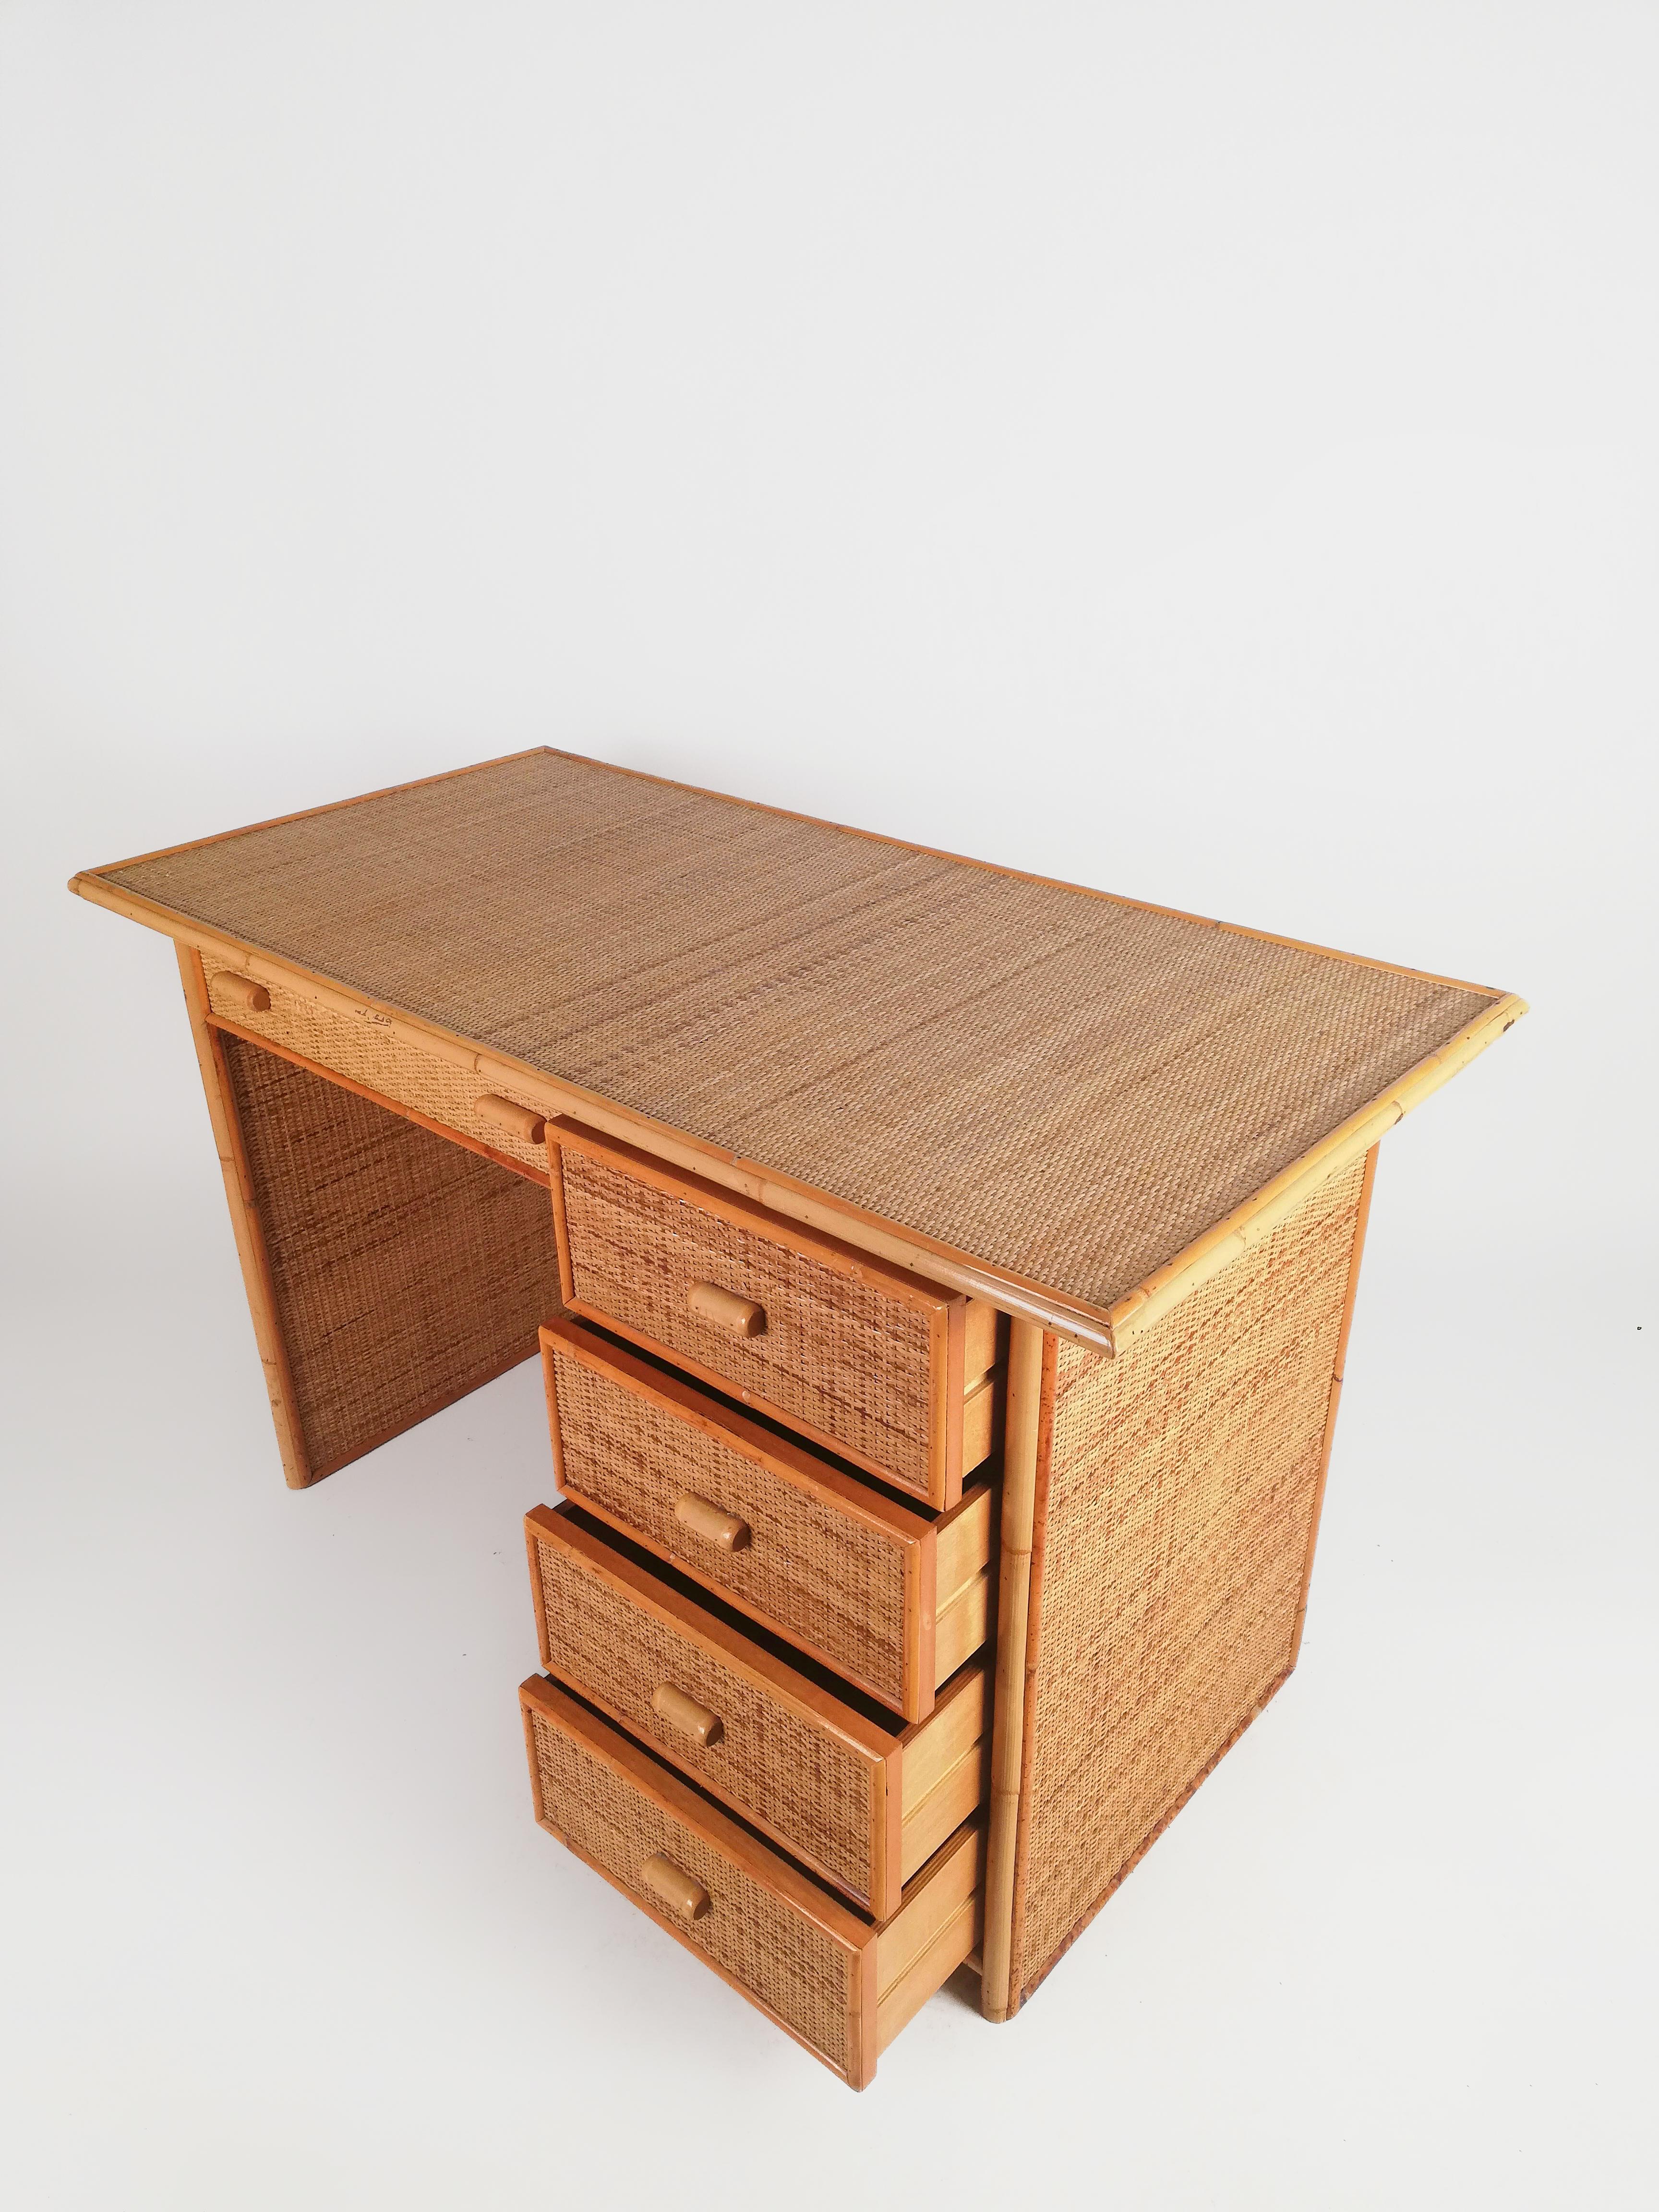 Vintage Italian Writing Desk with Drawers in Bamboo, Rattan and Plywood, 1970s For Sale 10